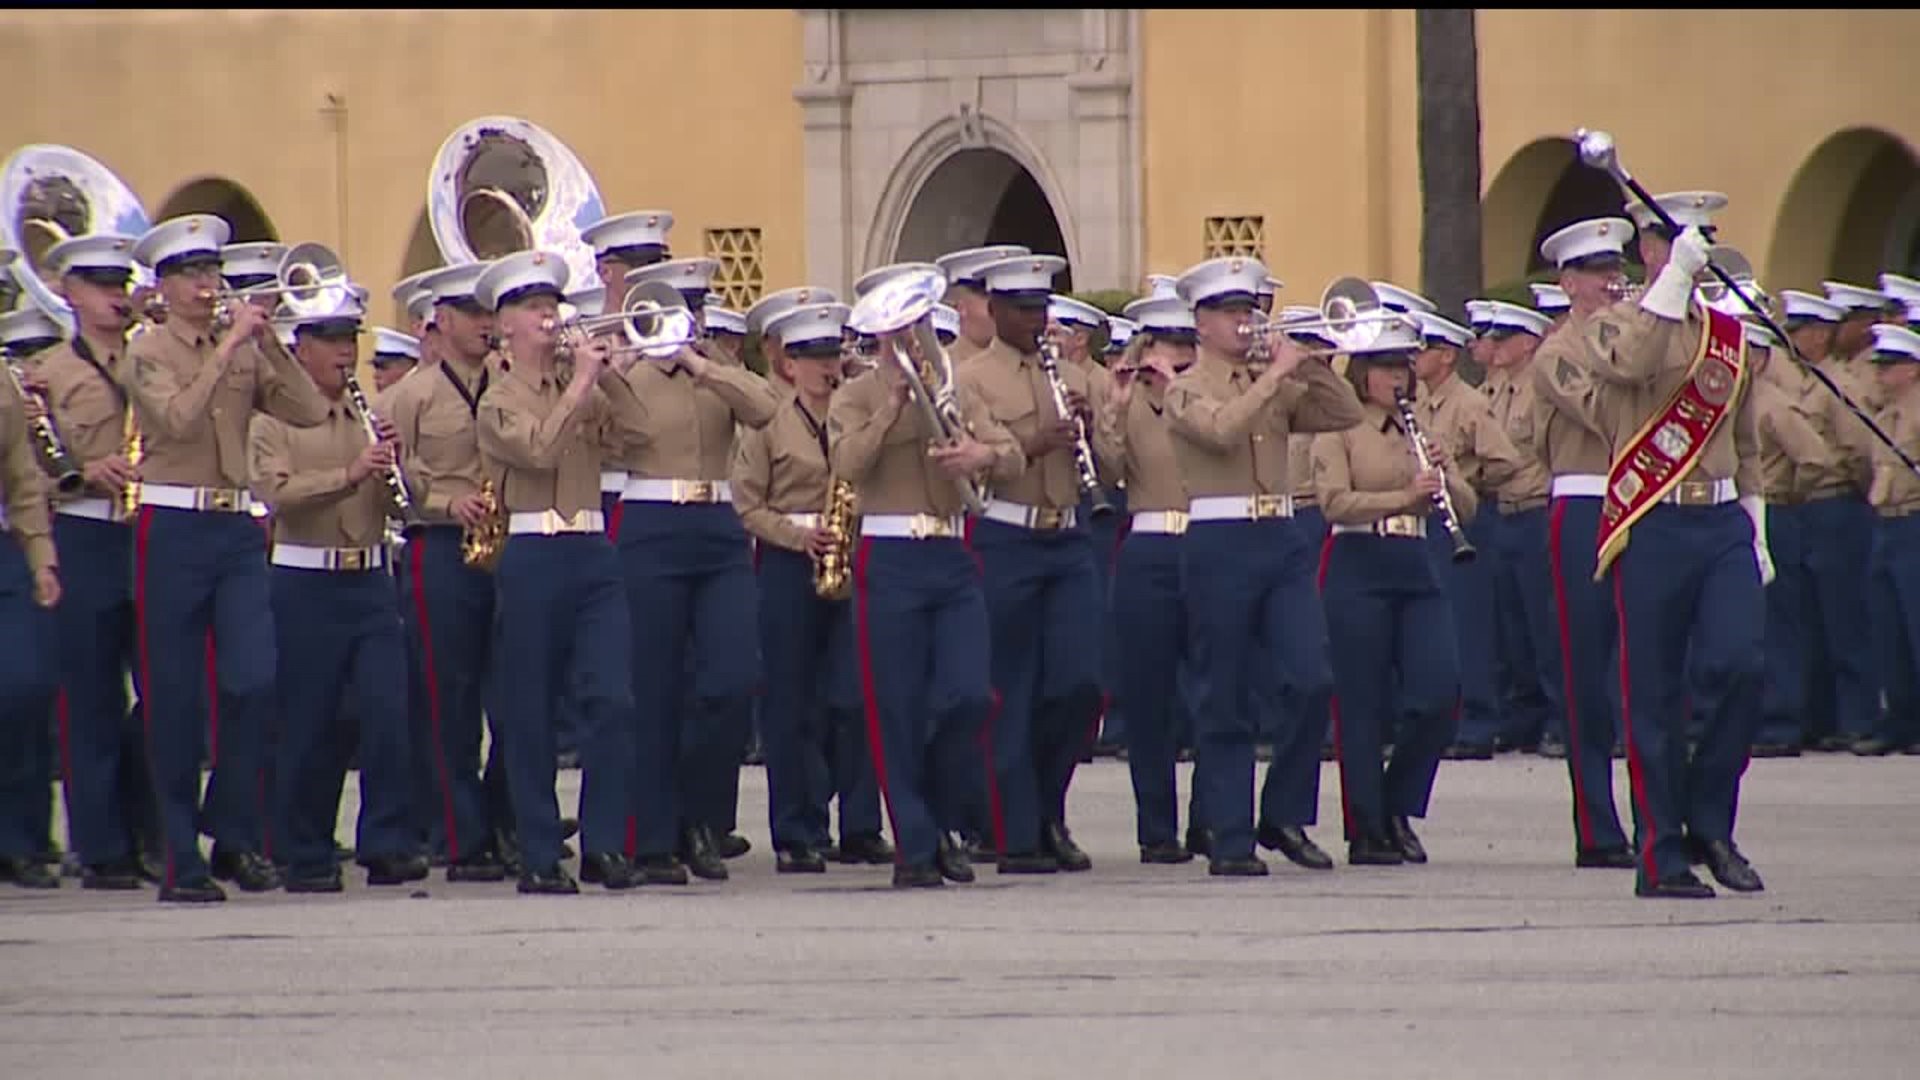 USMC: Maintaining a musical tradition